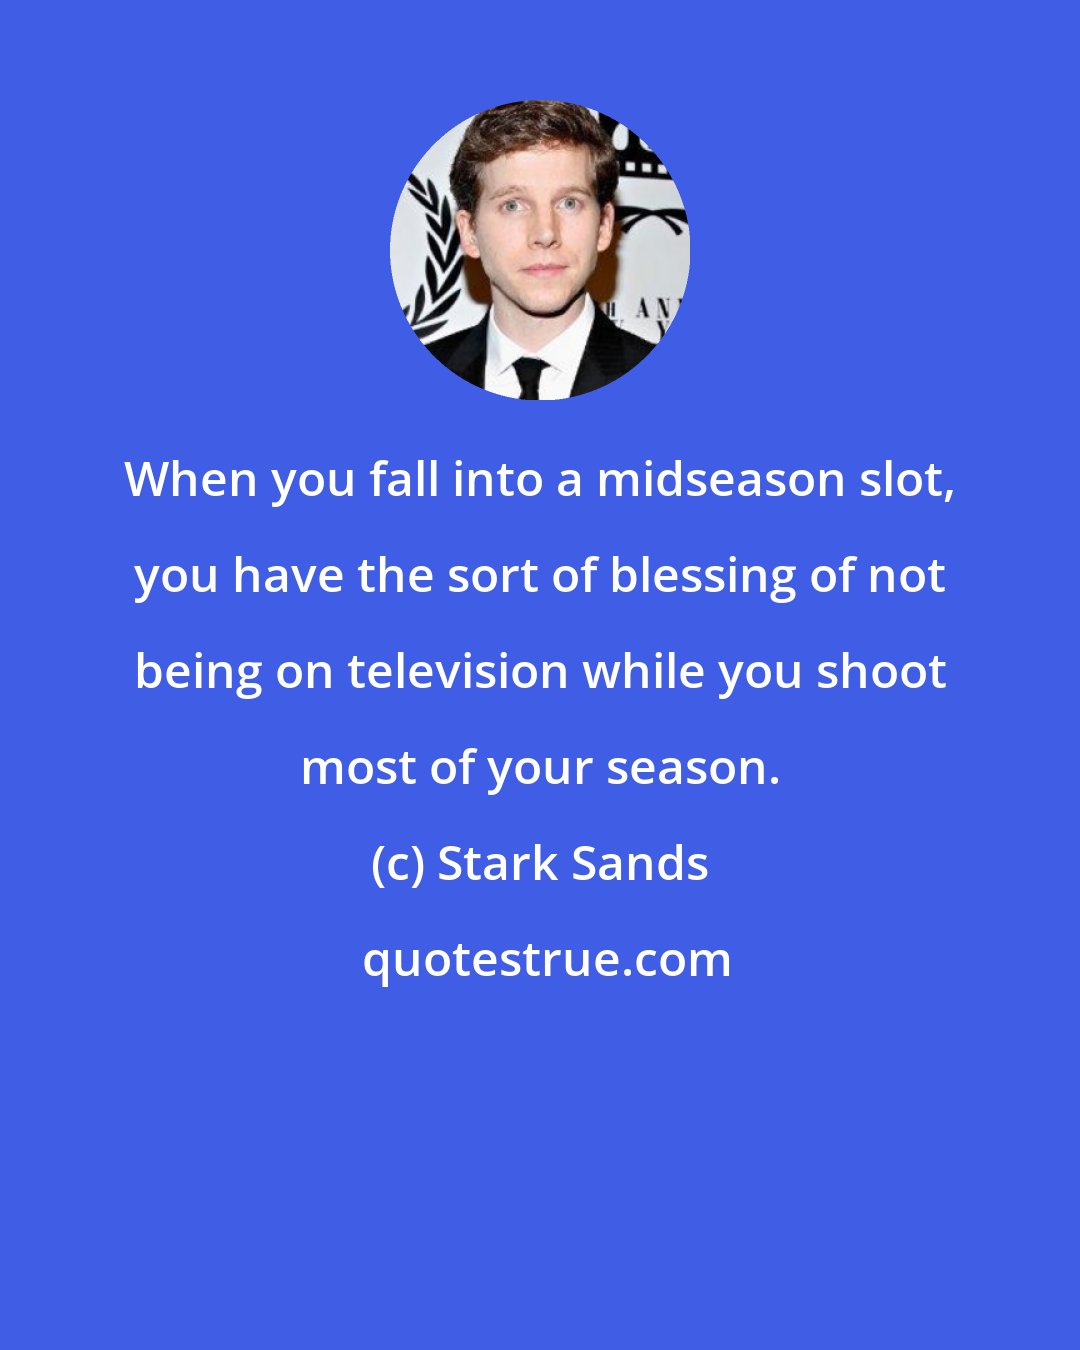 Stark Sands: When you fall into a midseason slot, you have the sort of blessing of not being on television while you shoot most of your season.